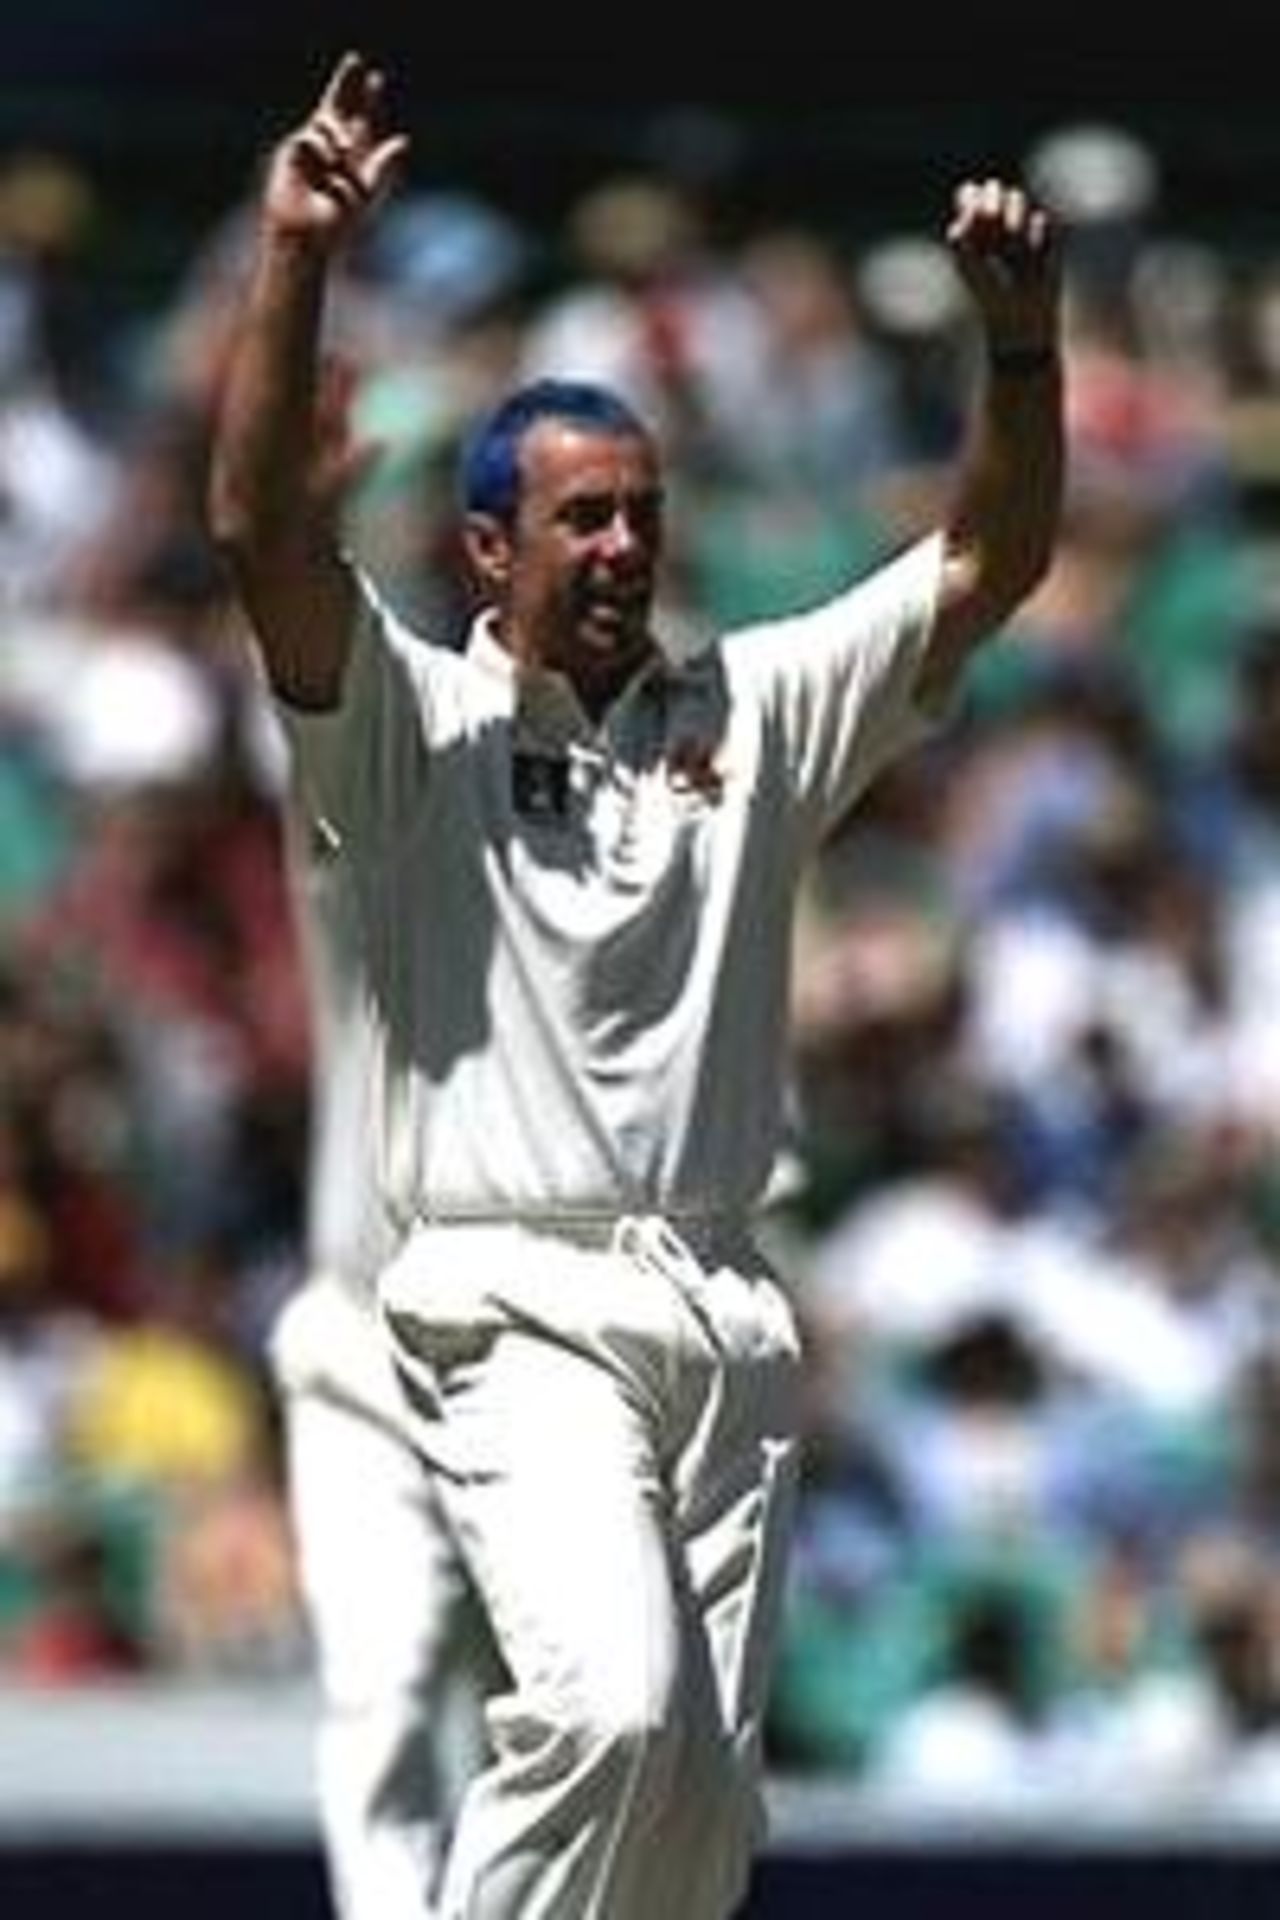 Colin Miller of Australia with his new blue haircut celebrates the wicket of Courtney Walsh of West Indies caught by Matthew Hayden for four during the second days play of the Fifth Test Match between Australia and West Indies at the Sydney Cricket Ground, Sydney, Australia.